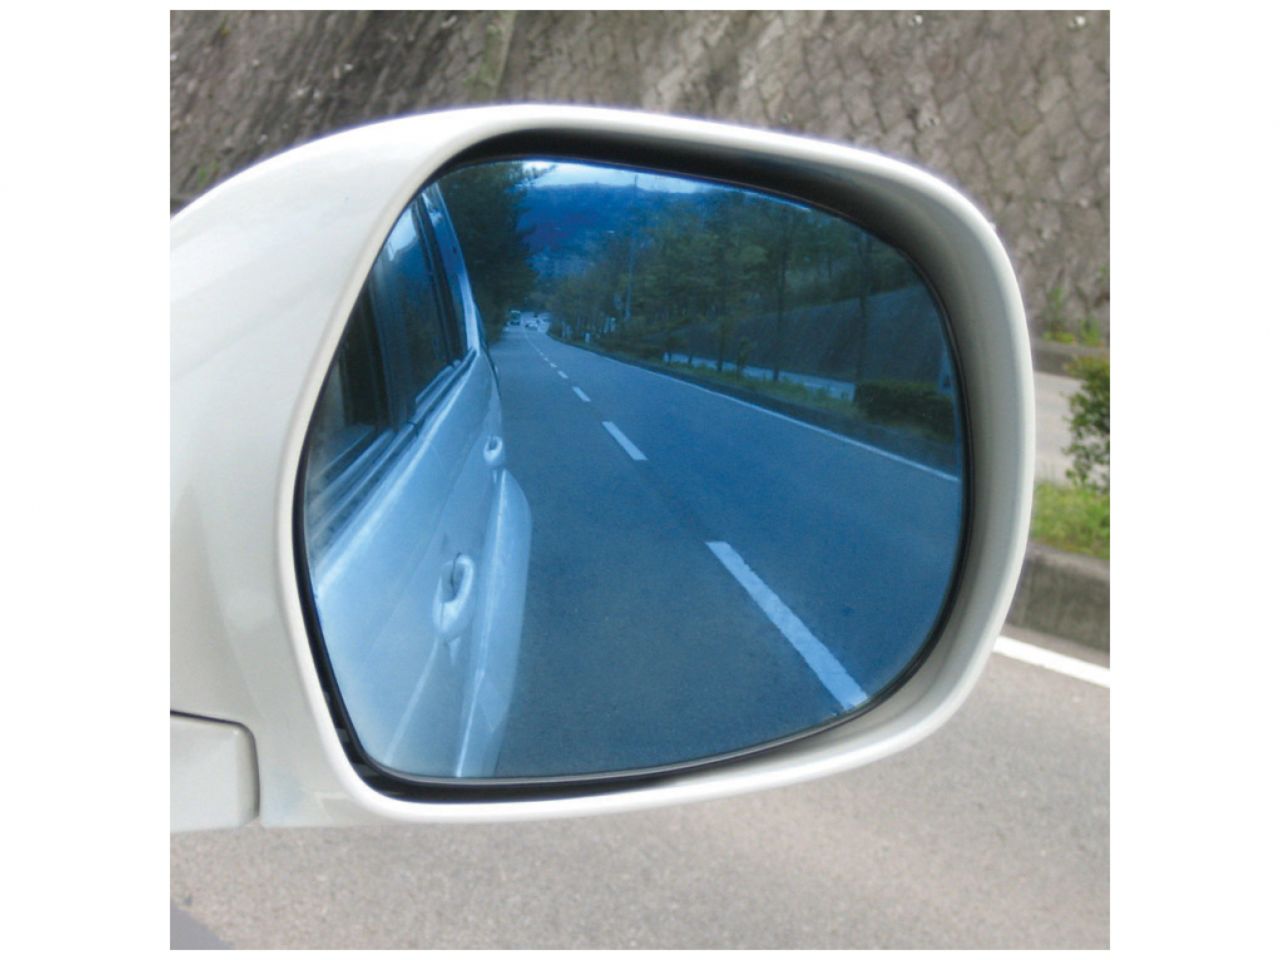 Nokya Vans Spray Paint - For Outside Rear View Mirror Blue